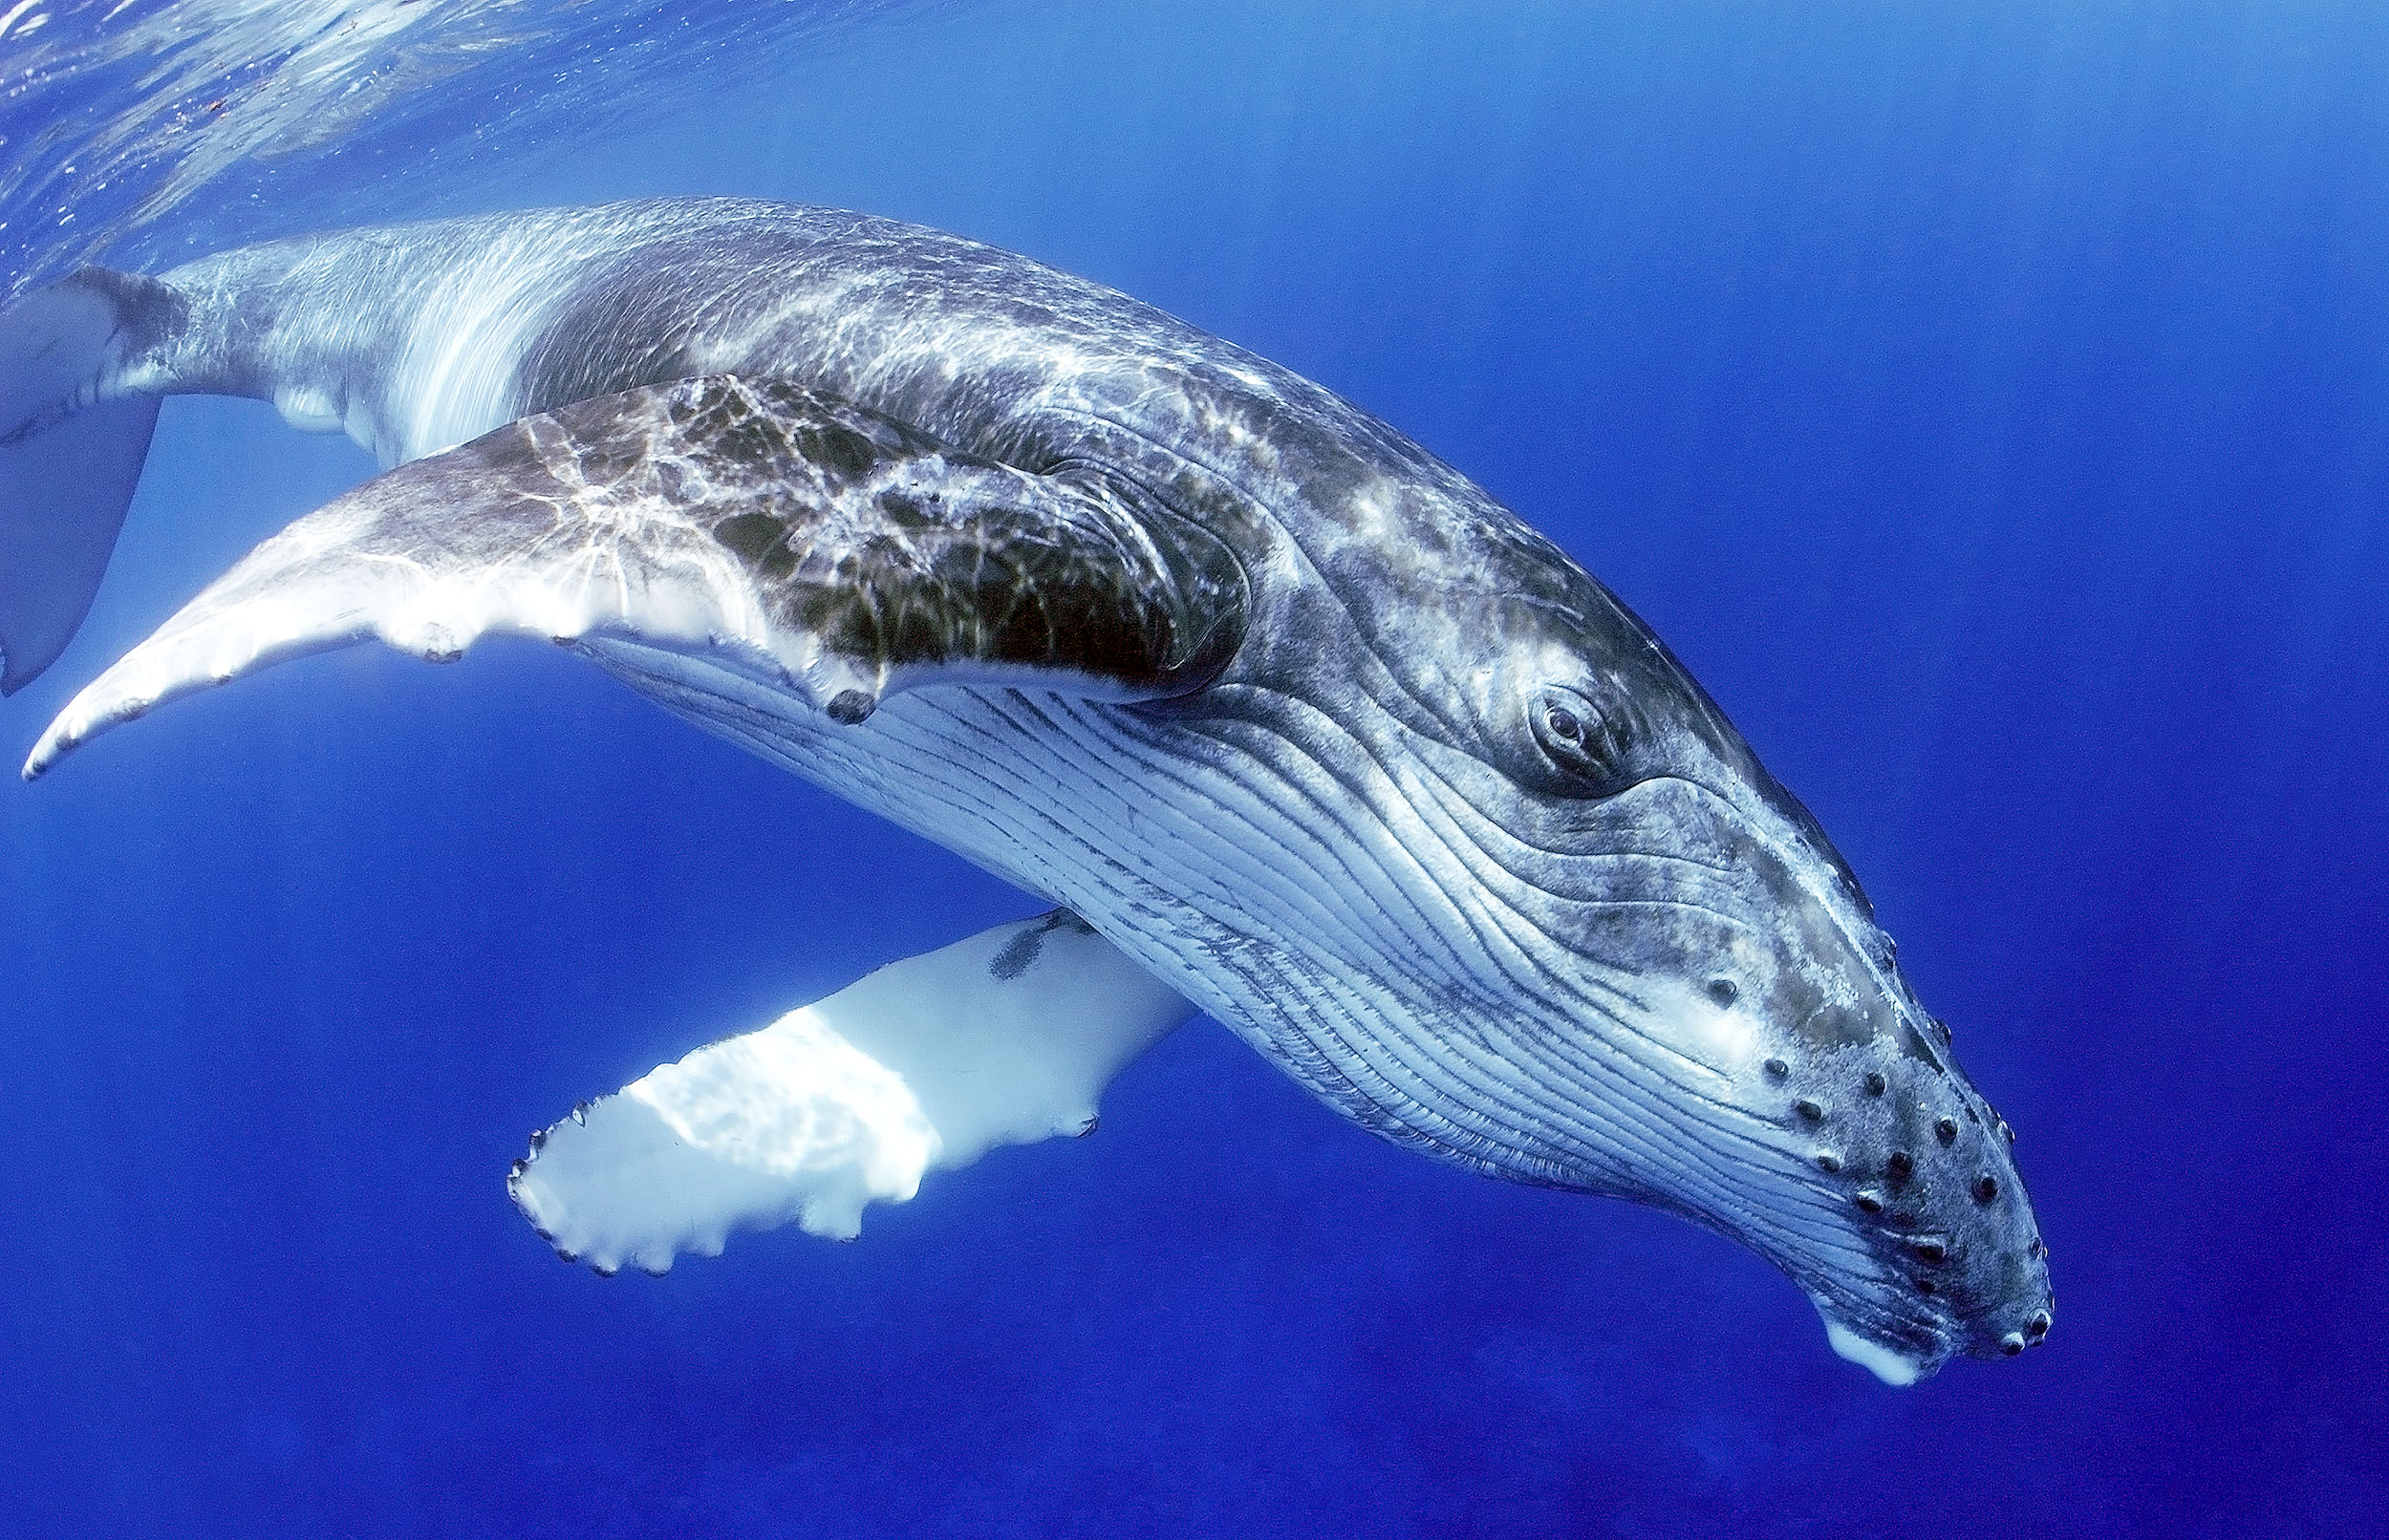 A humpback whale swimming in the ocean